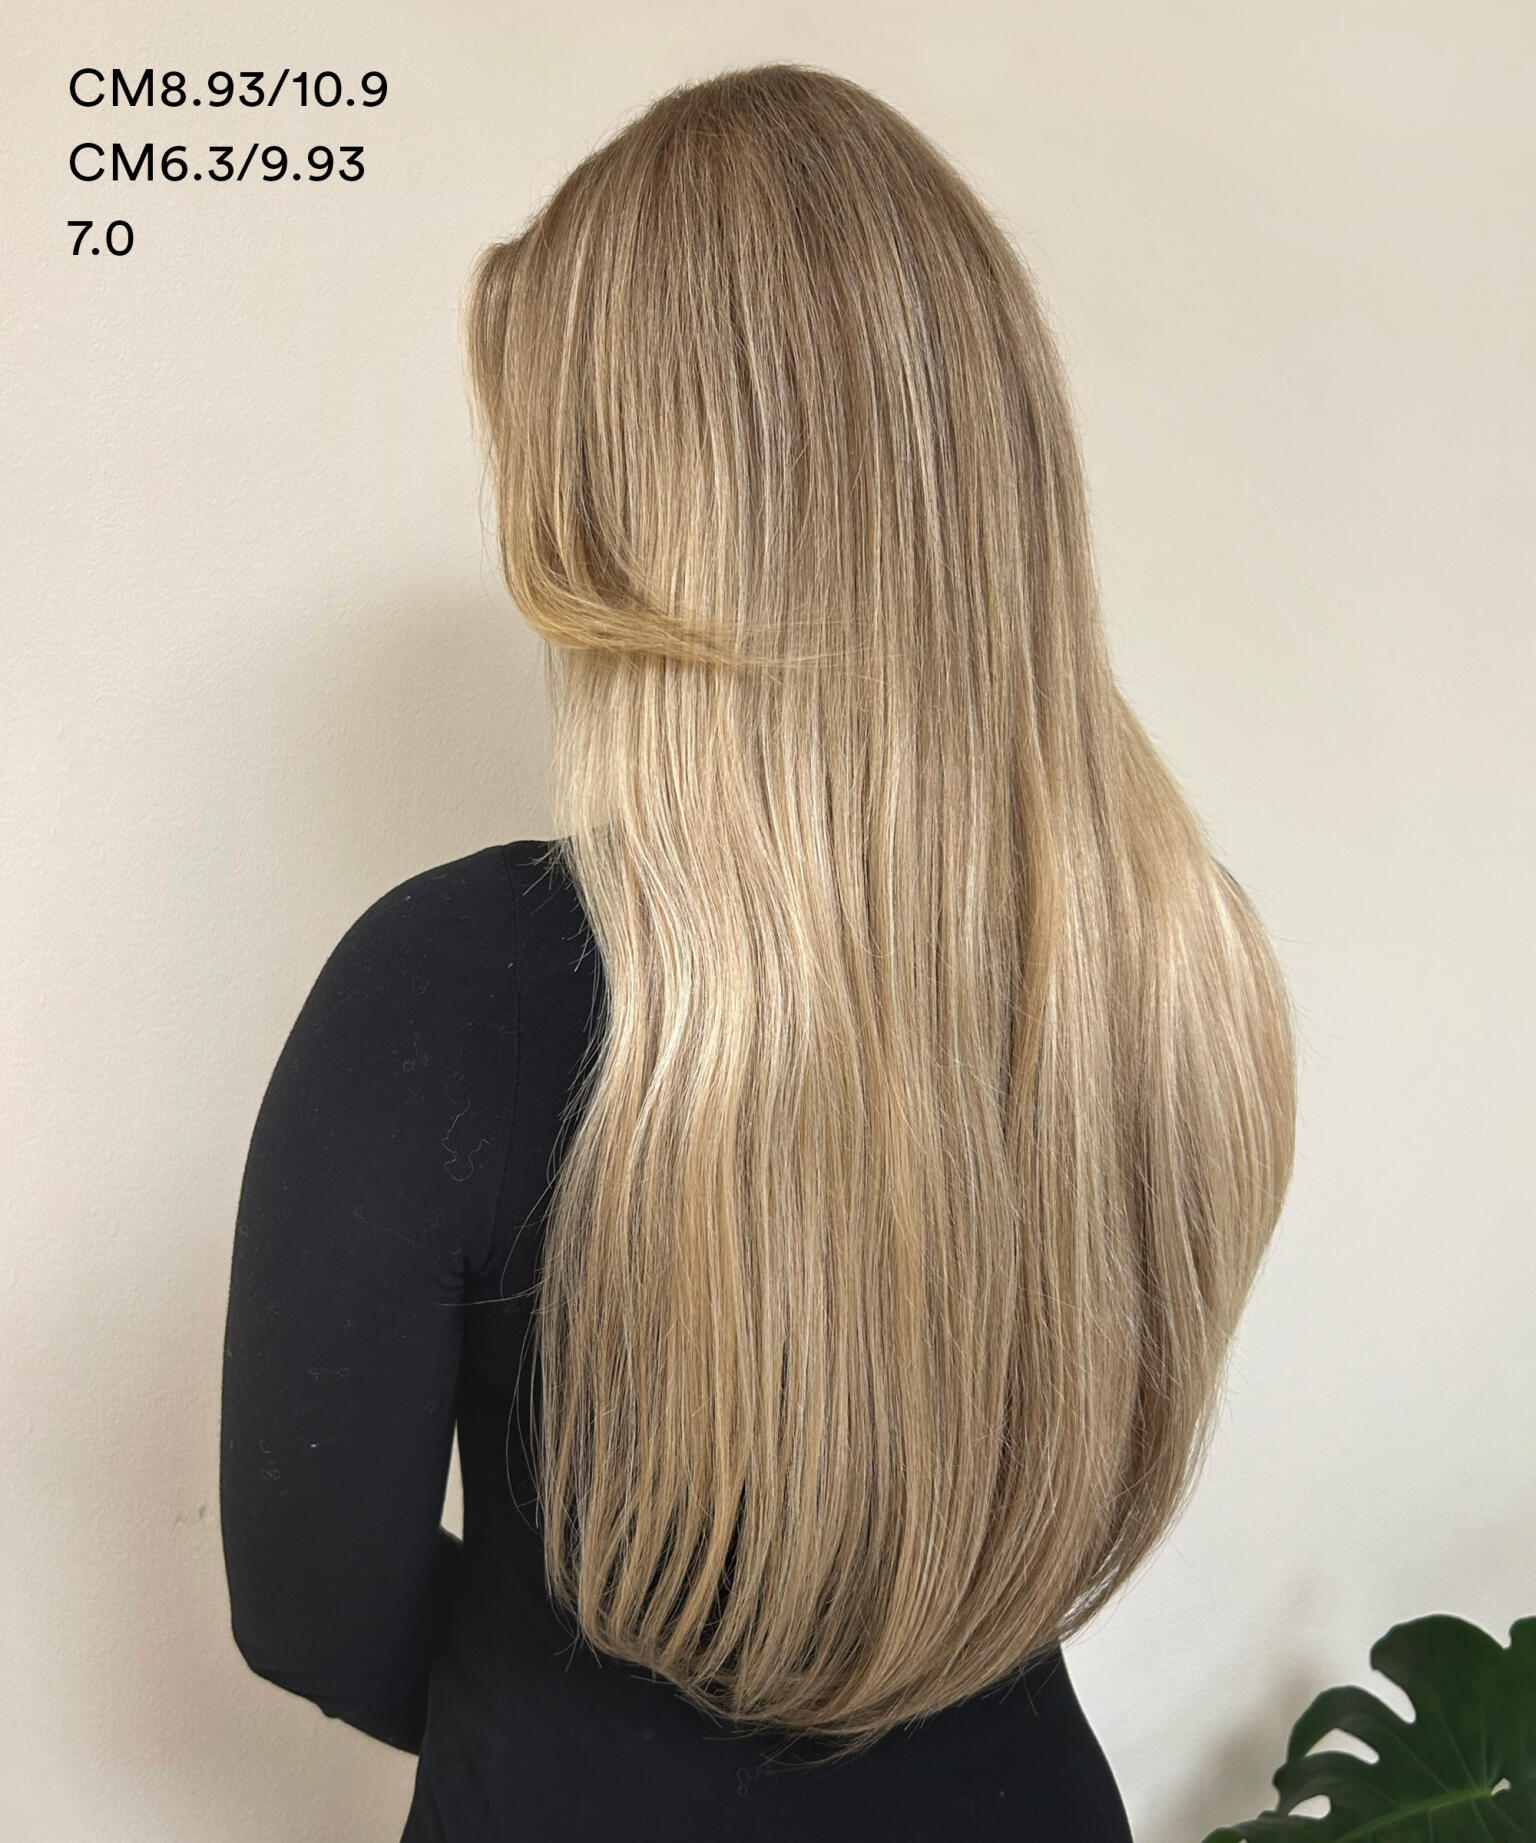 Luxe Tape Extensions Seamless 4 CM6.3/9.93 30 cm